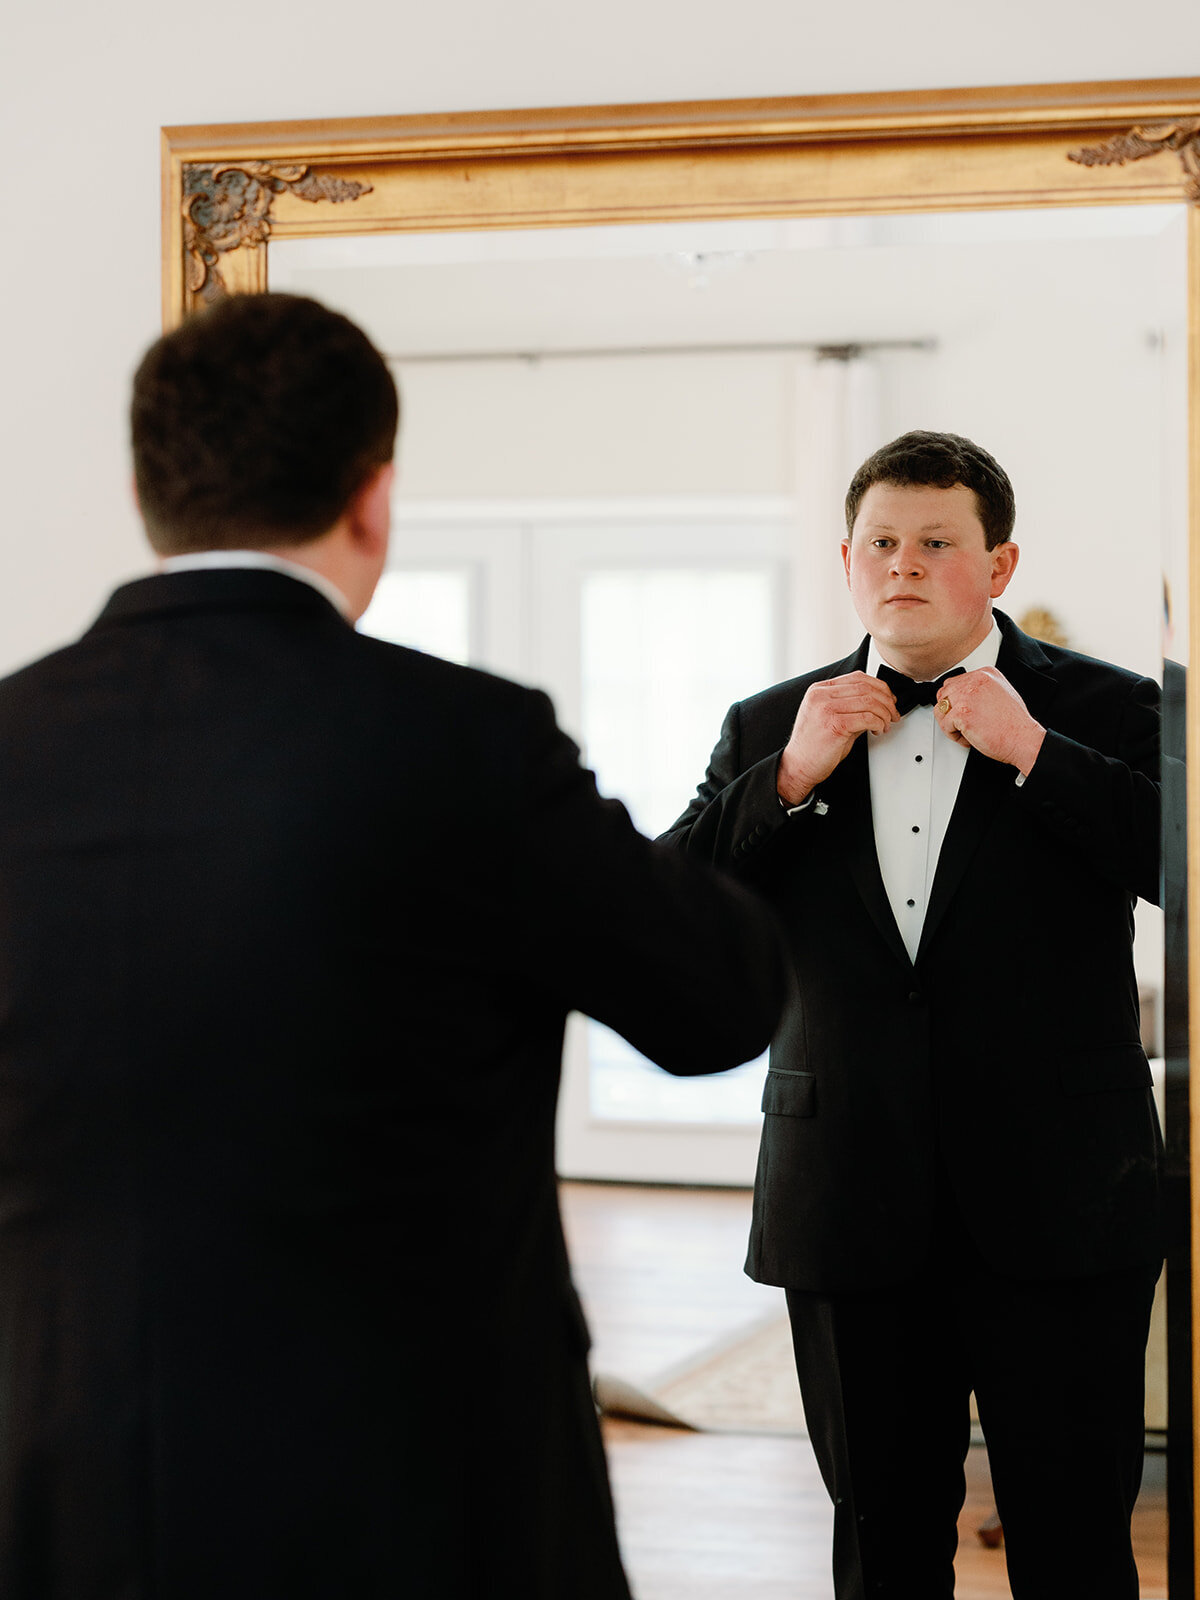 Groom get ready in front of the mirror on his wedding day.